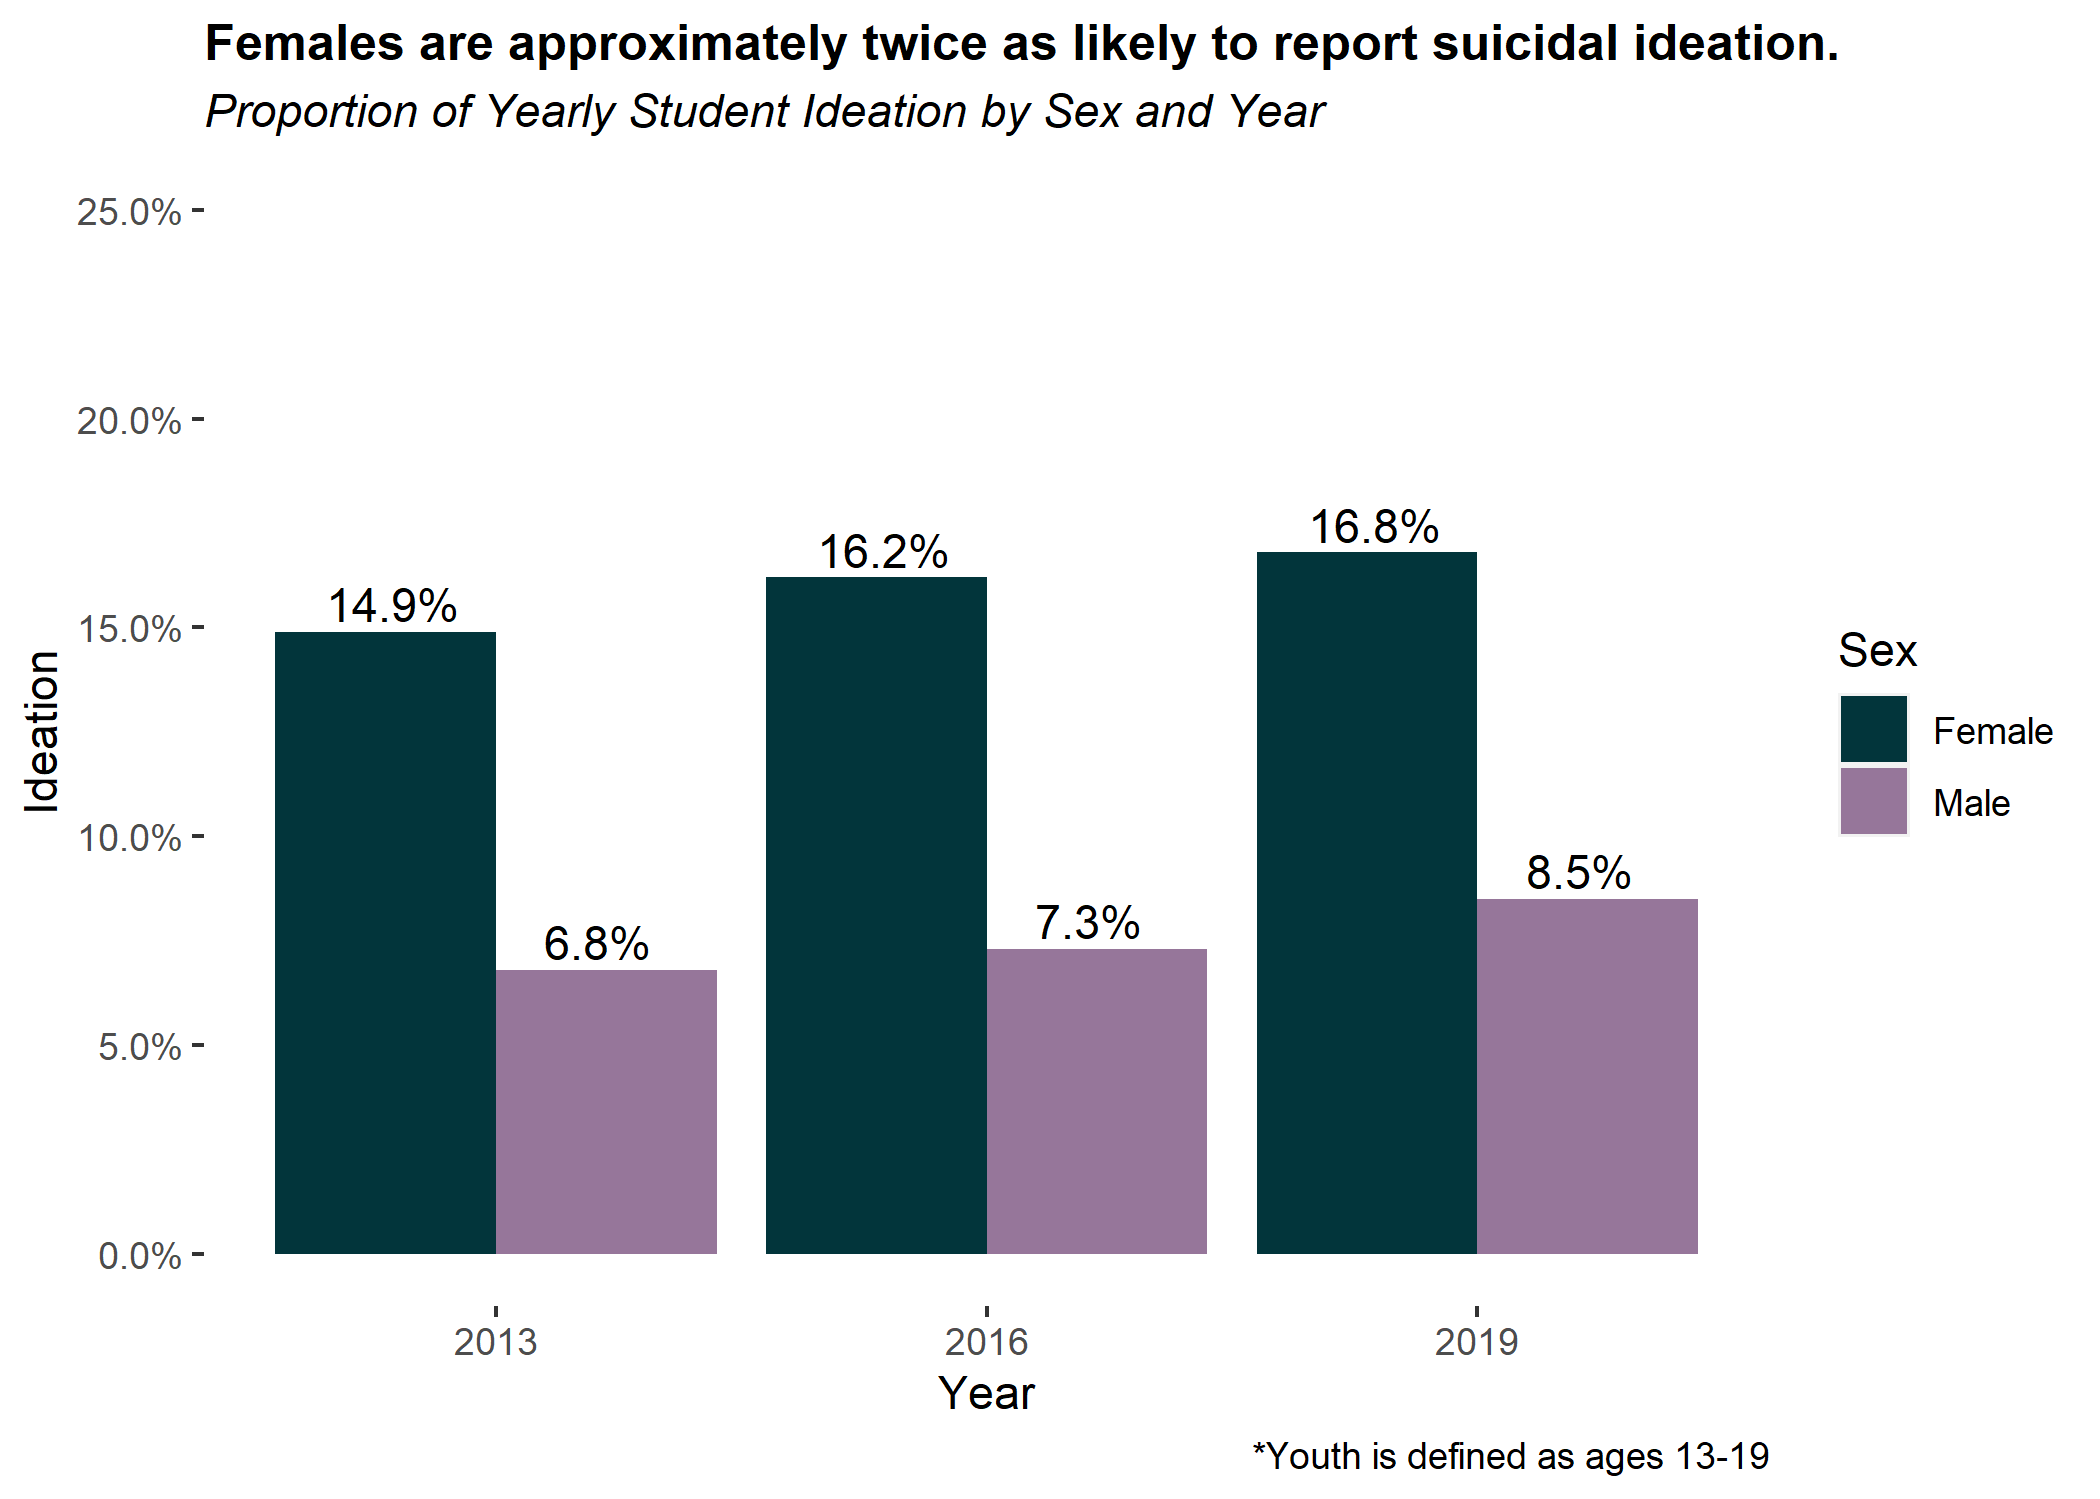 Proportion of yearly student ideation by sex and year.
Females are approximately twice as likely to report suicidal ideation.